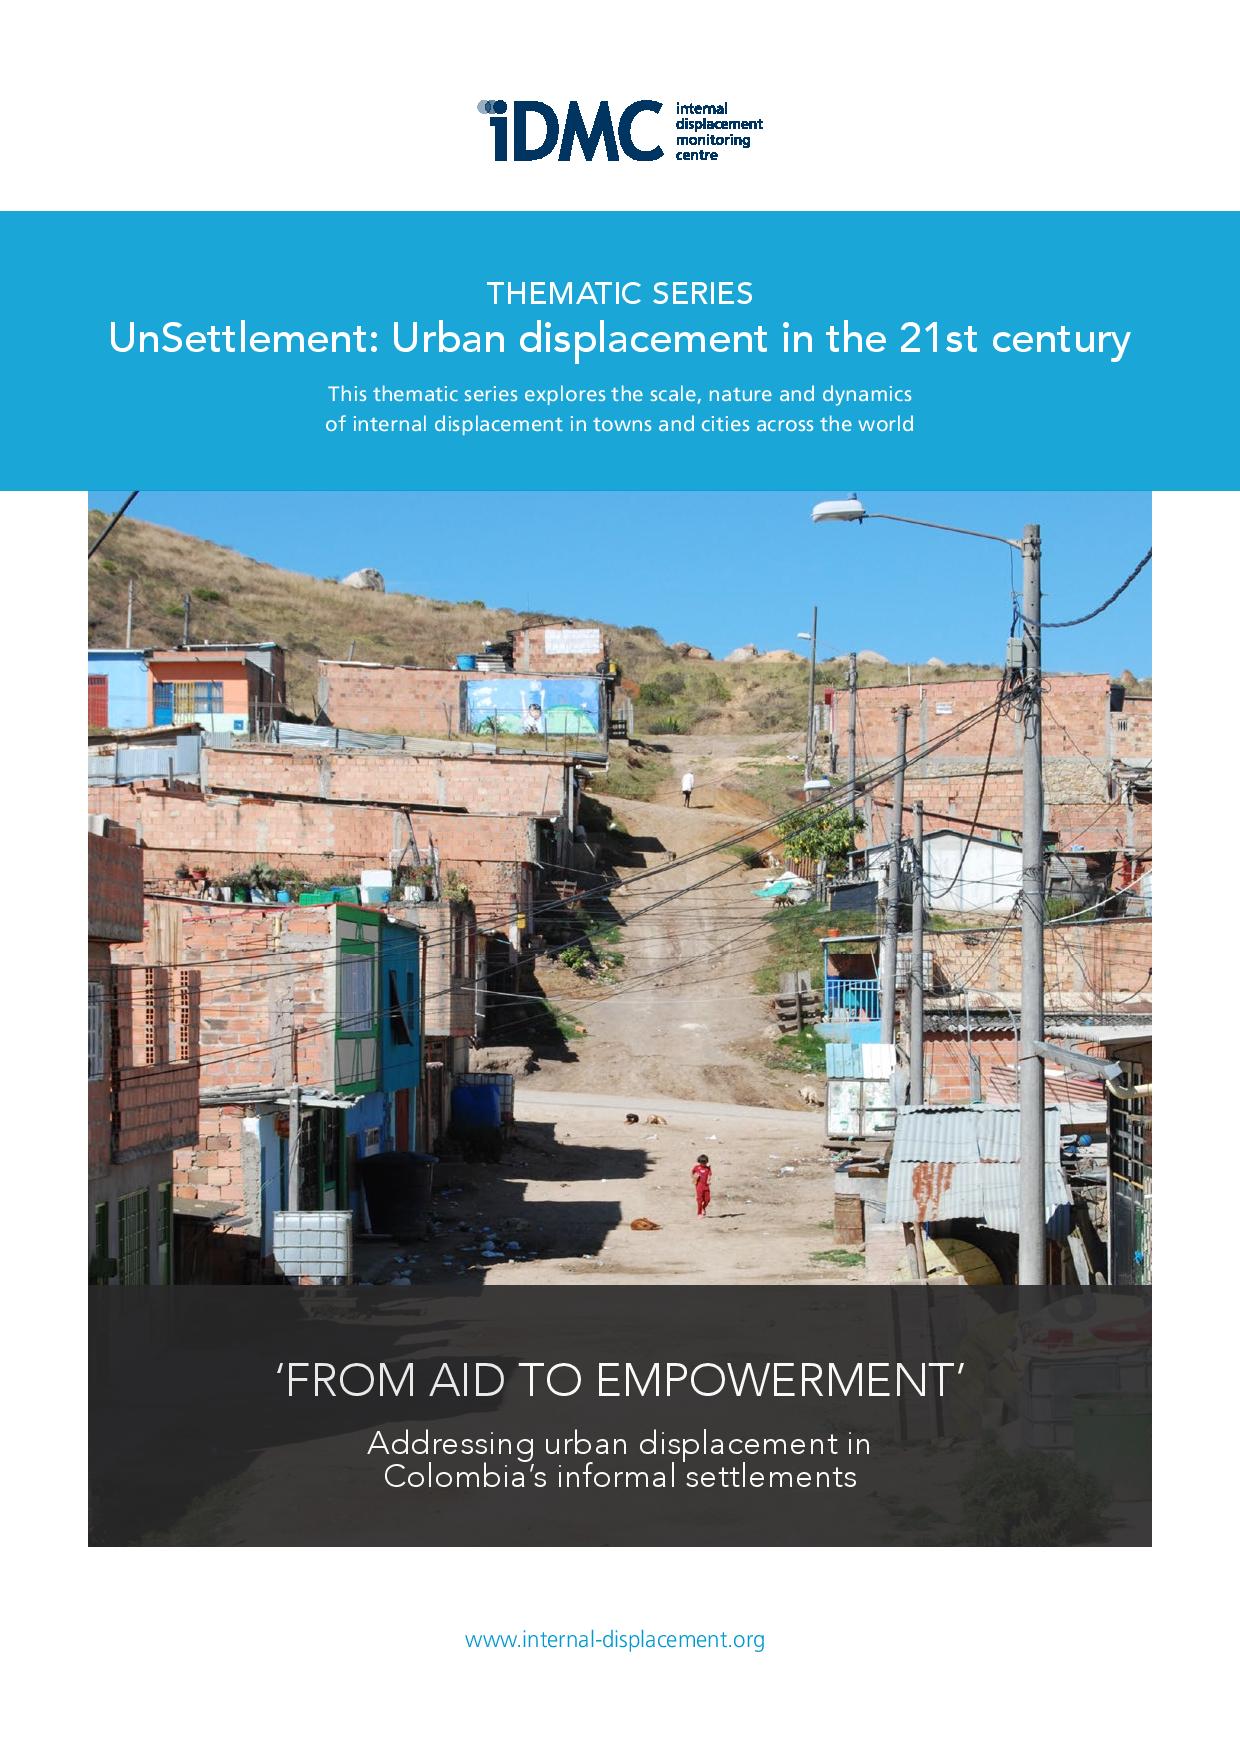 From aid to empowerment: Addressing urban displacement in Colombia’s informal settlements